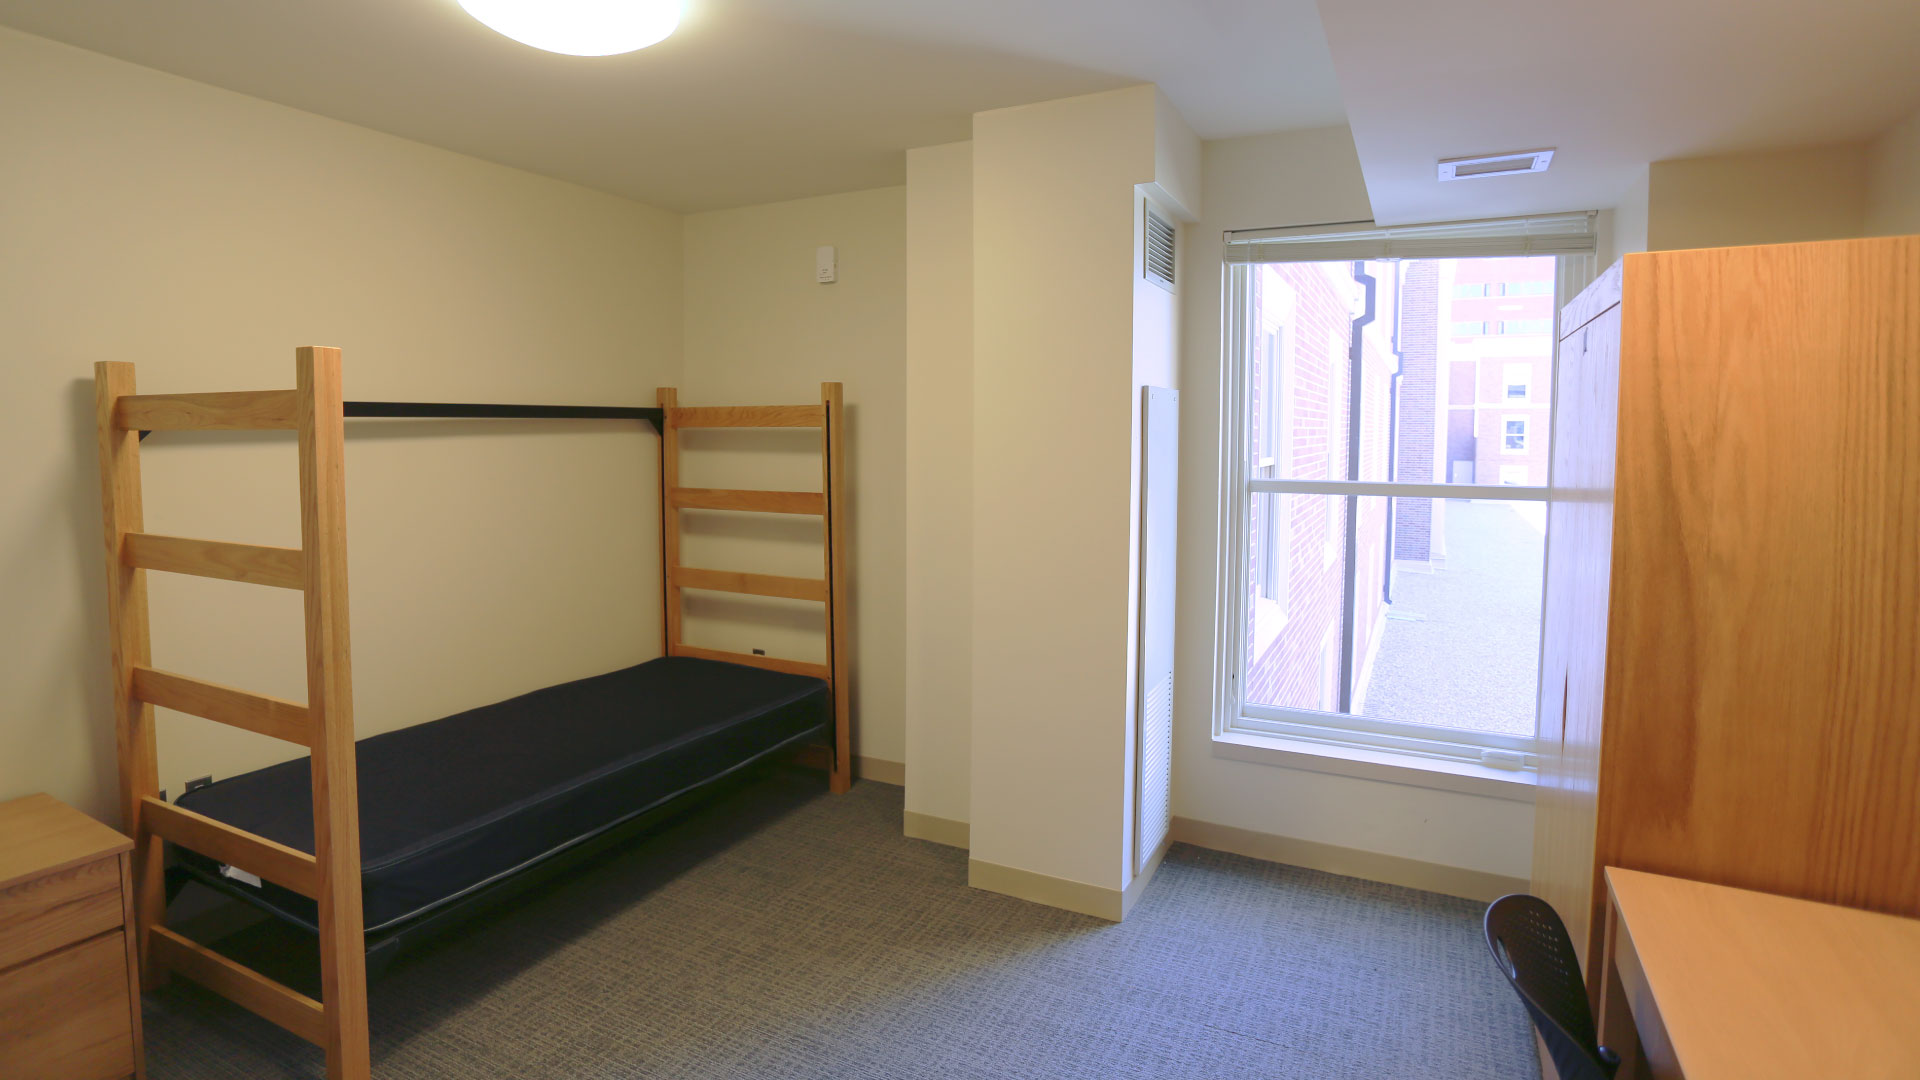 View of a resident room with a bed, desk, and wardrobe